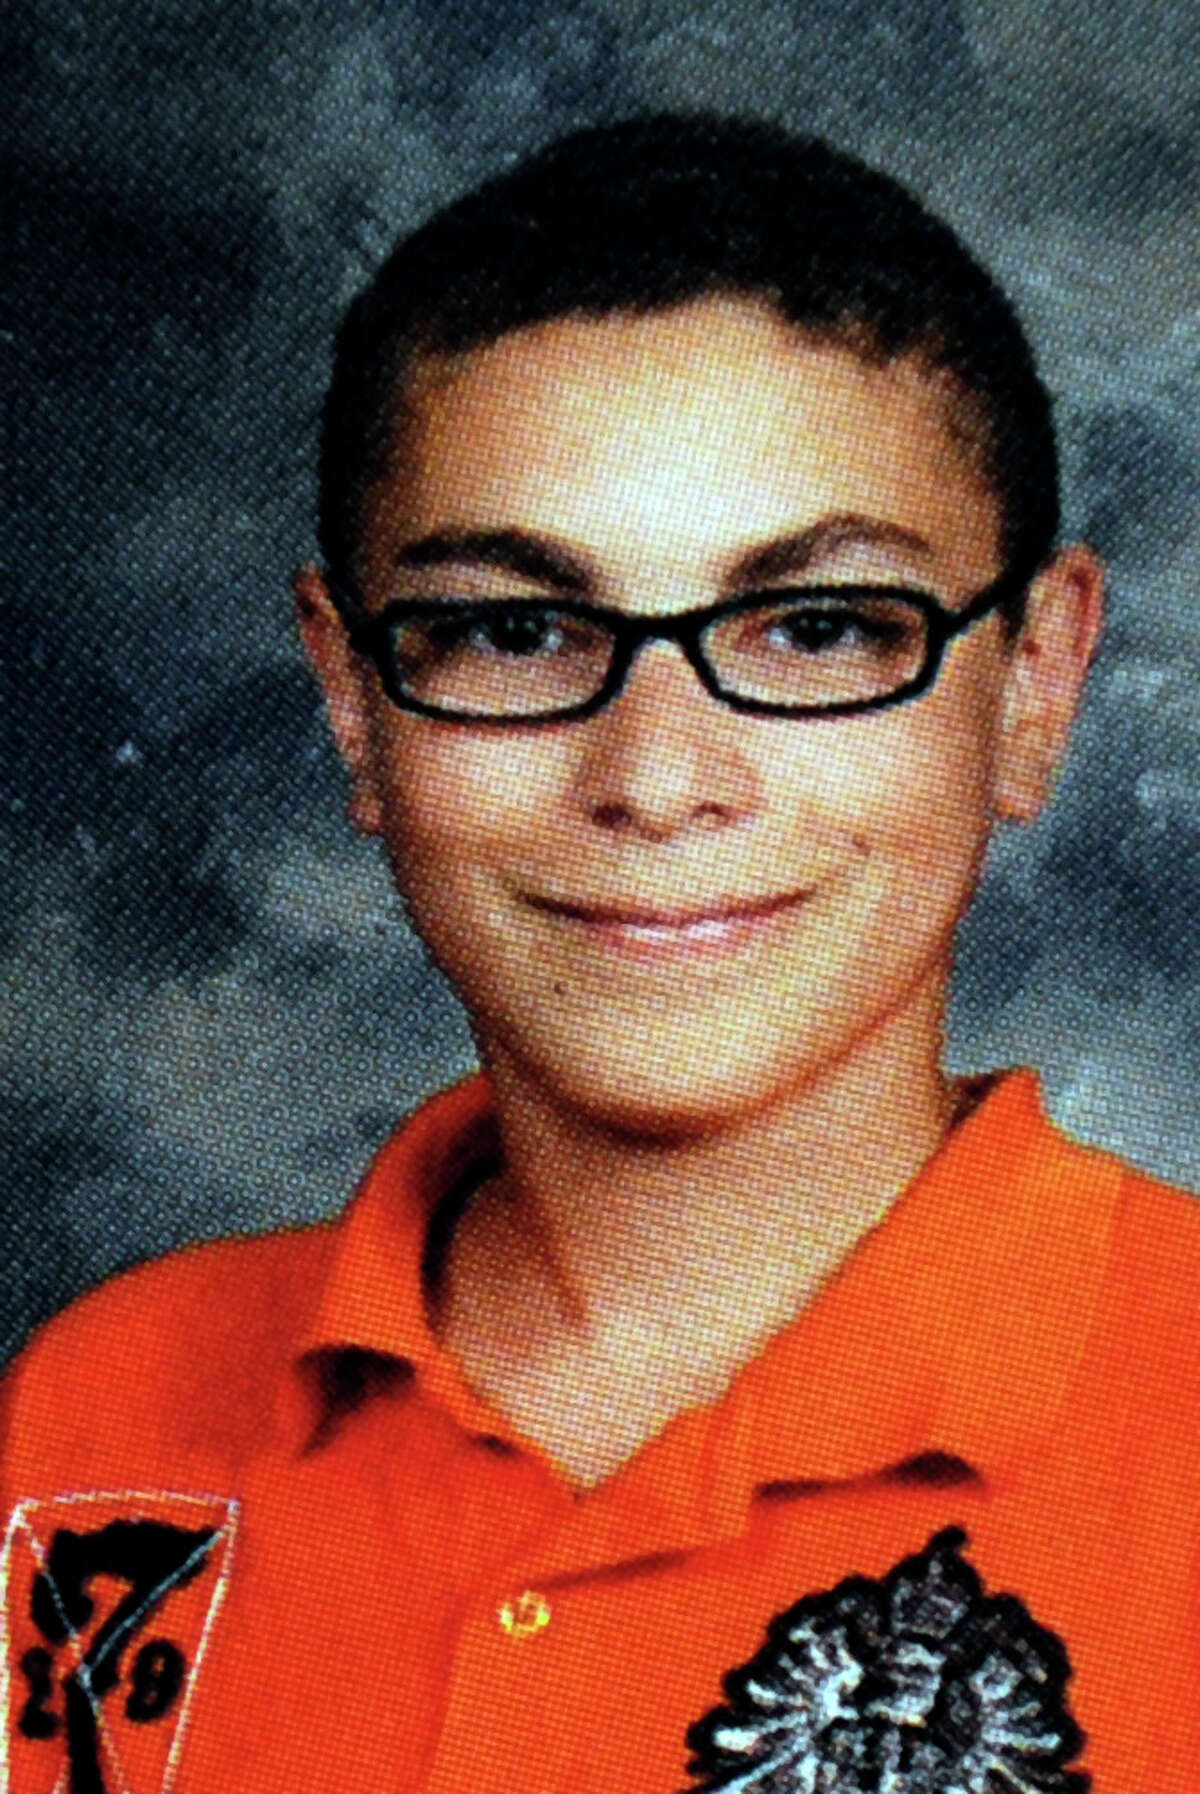 Tyler Guliano as he appeared in the 2012 New Fairfield High School yearbook.